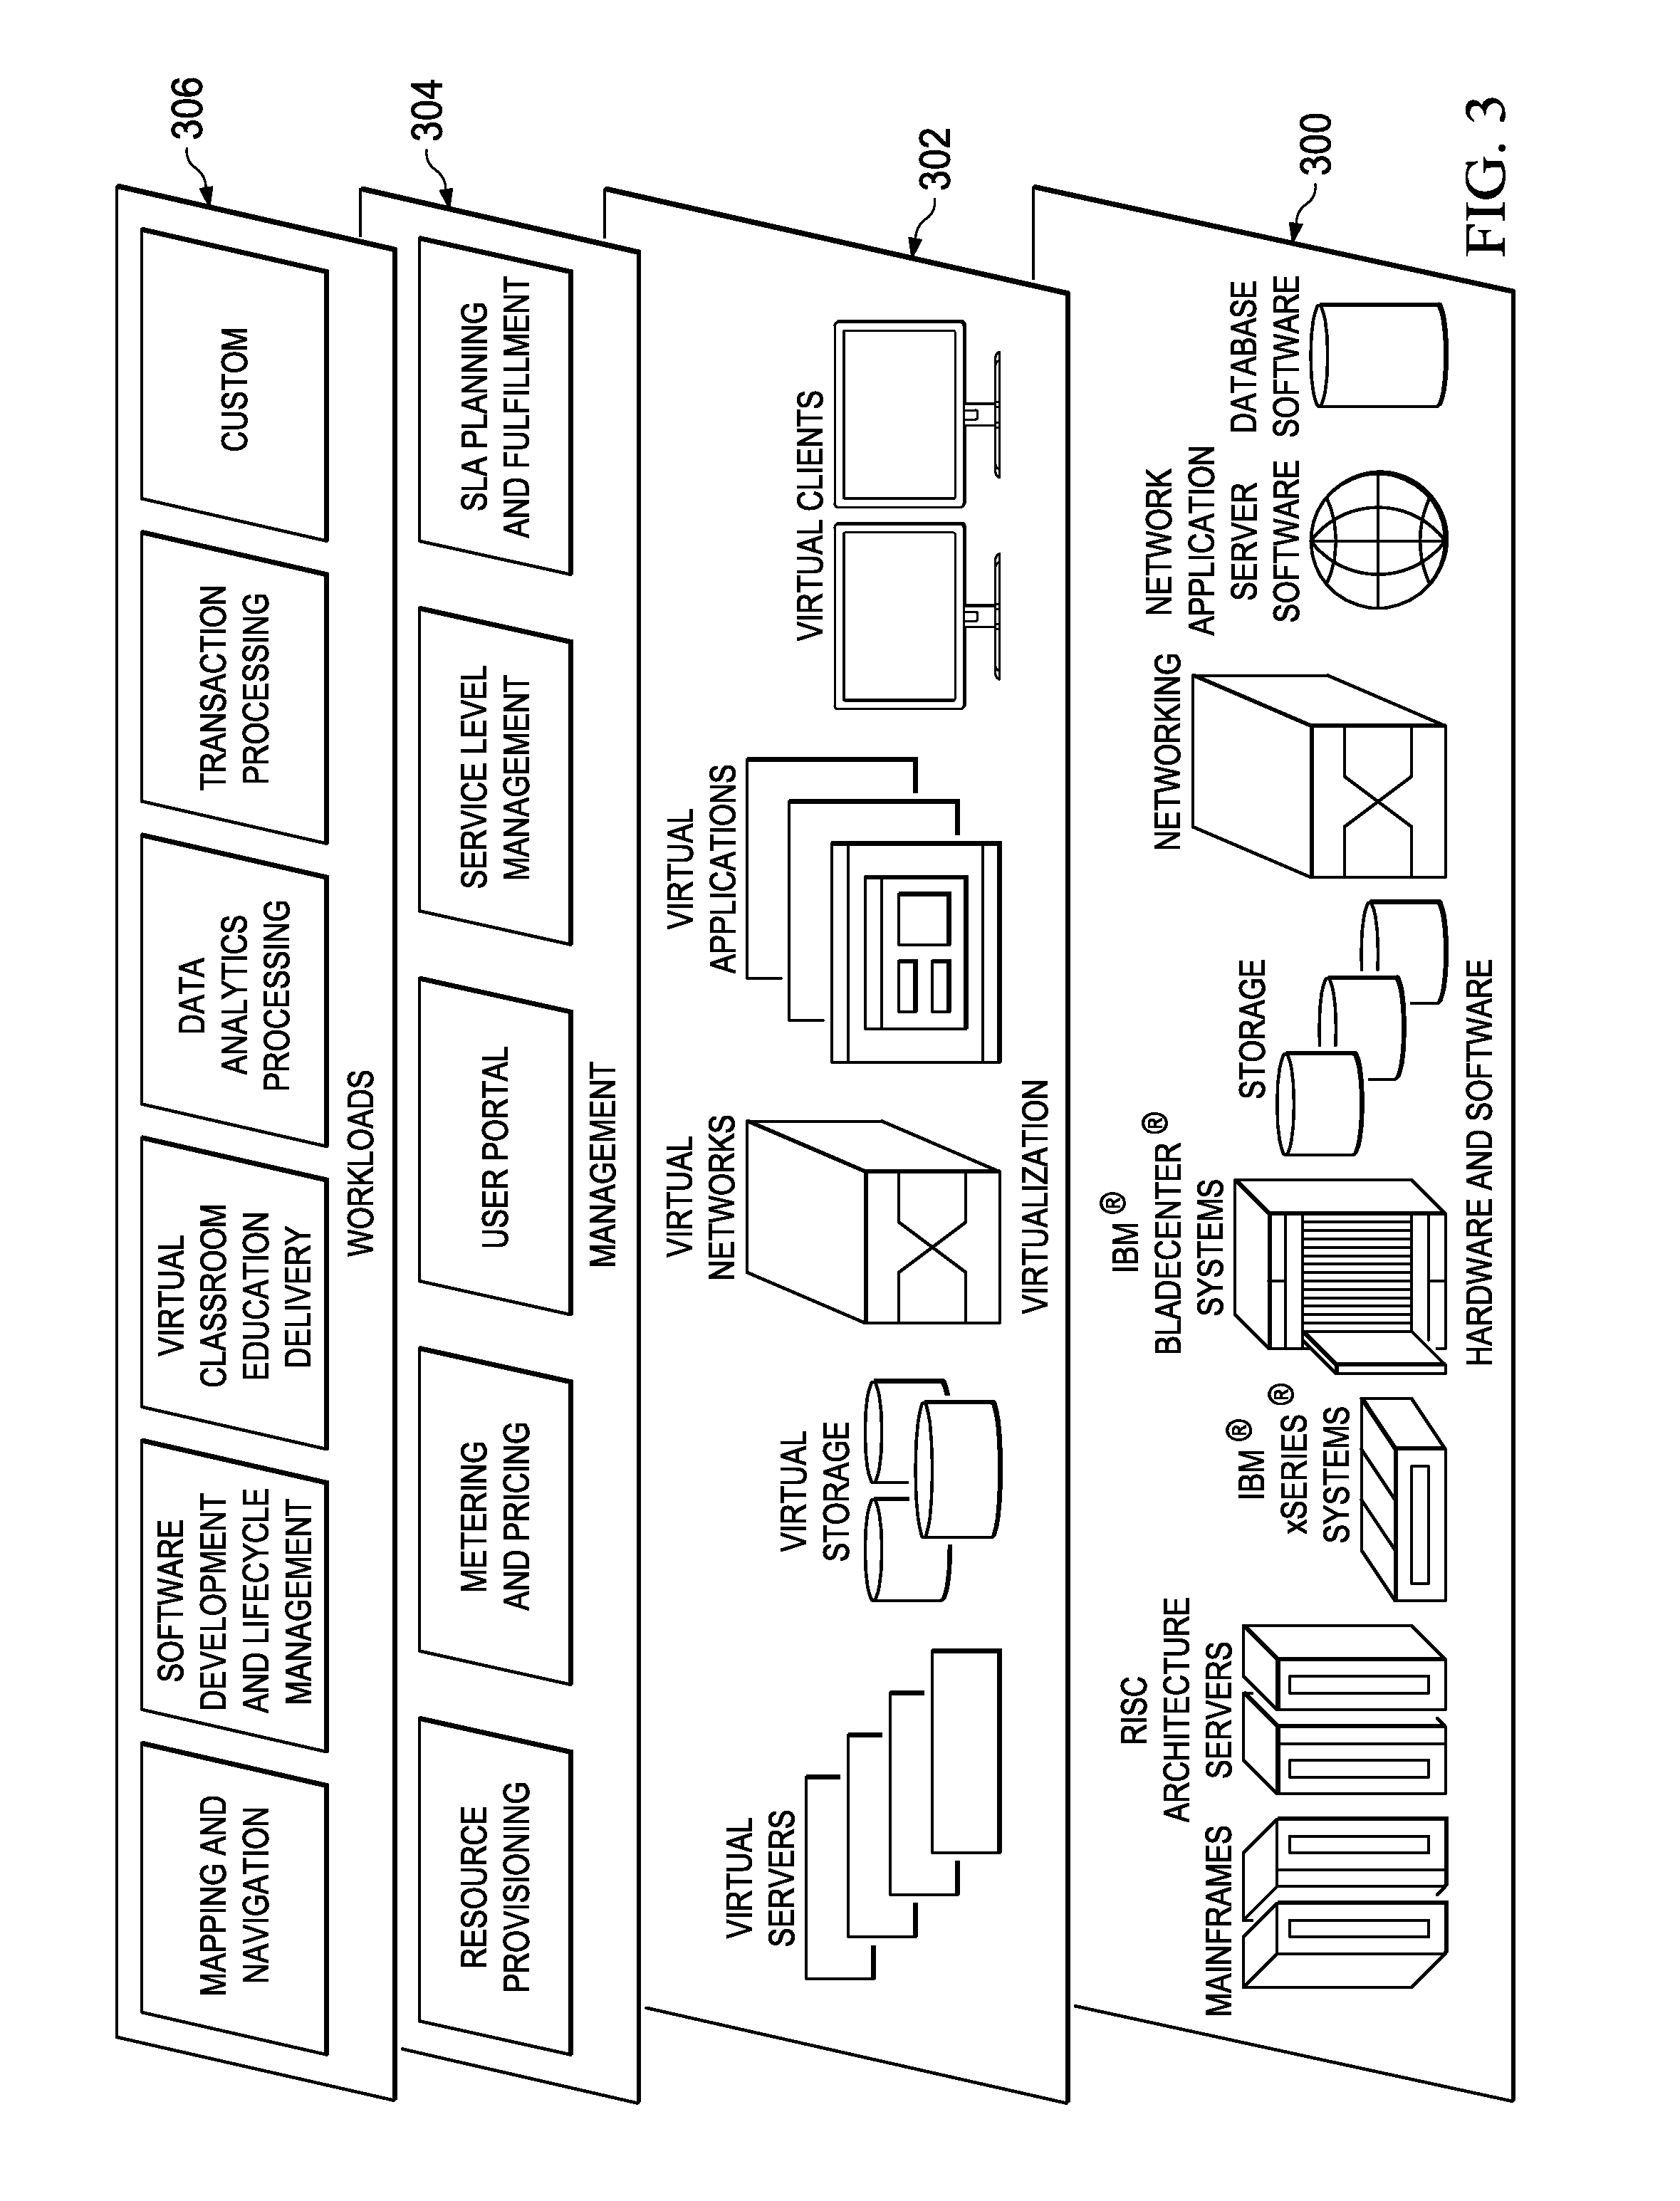 Administration of a context-based cloud security assurance system